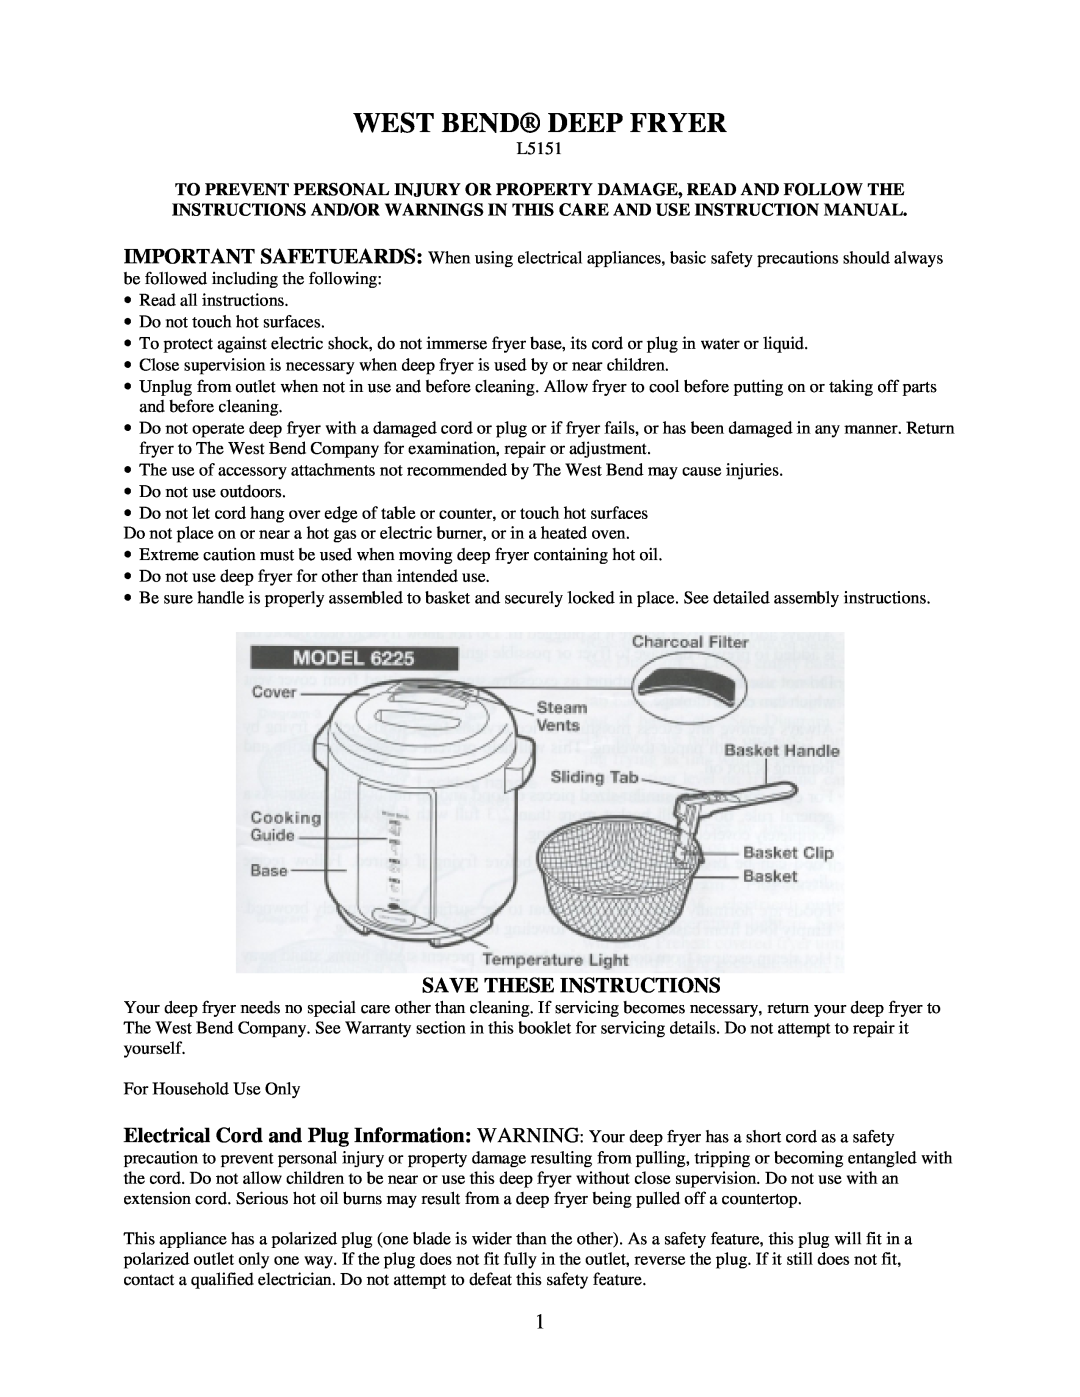 West Bend L5151 instruction manual Important Safetueards, Save These Instructions, West Bend Deep Fryer 